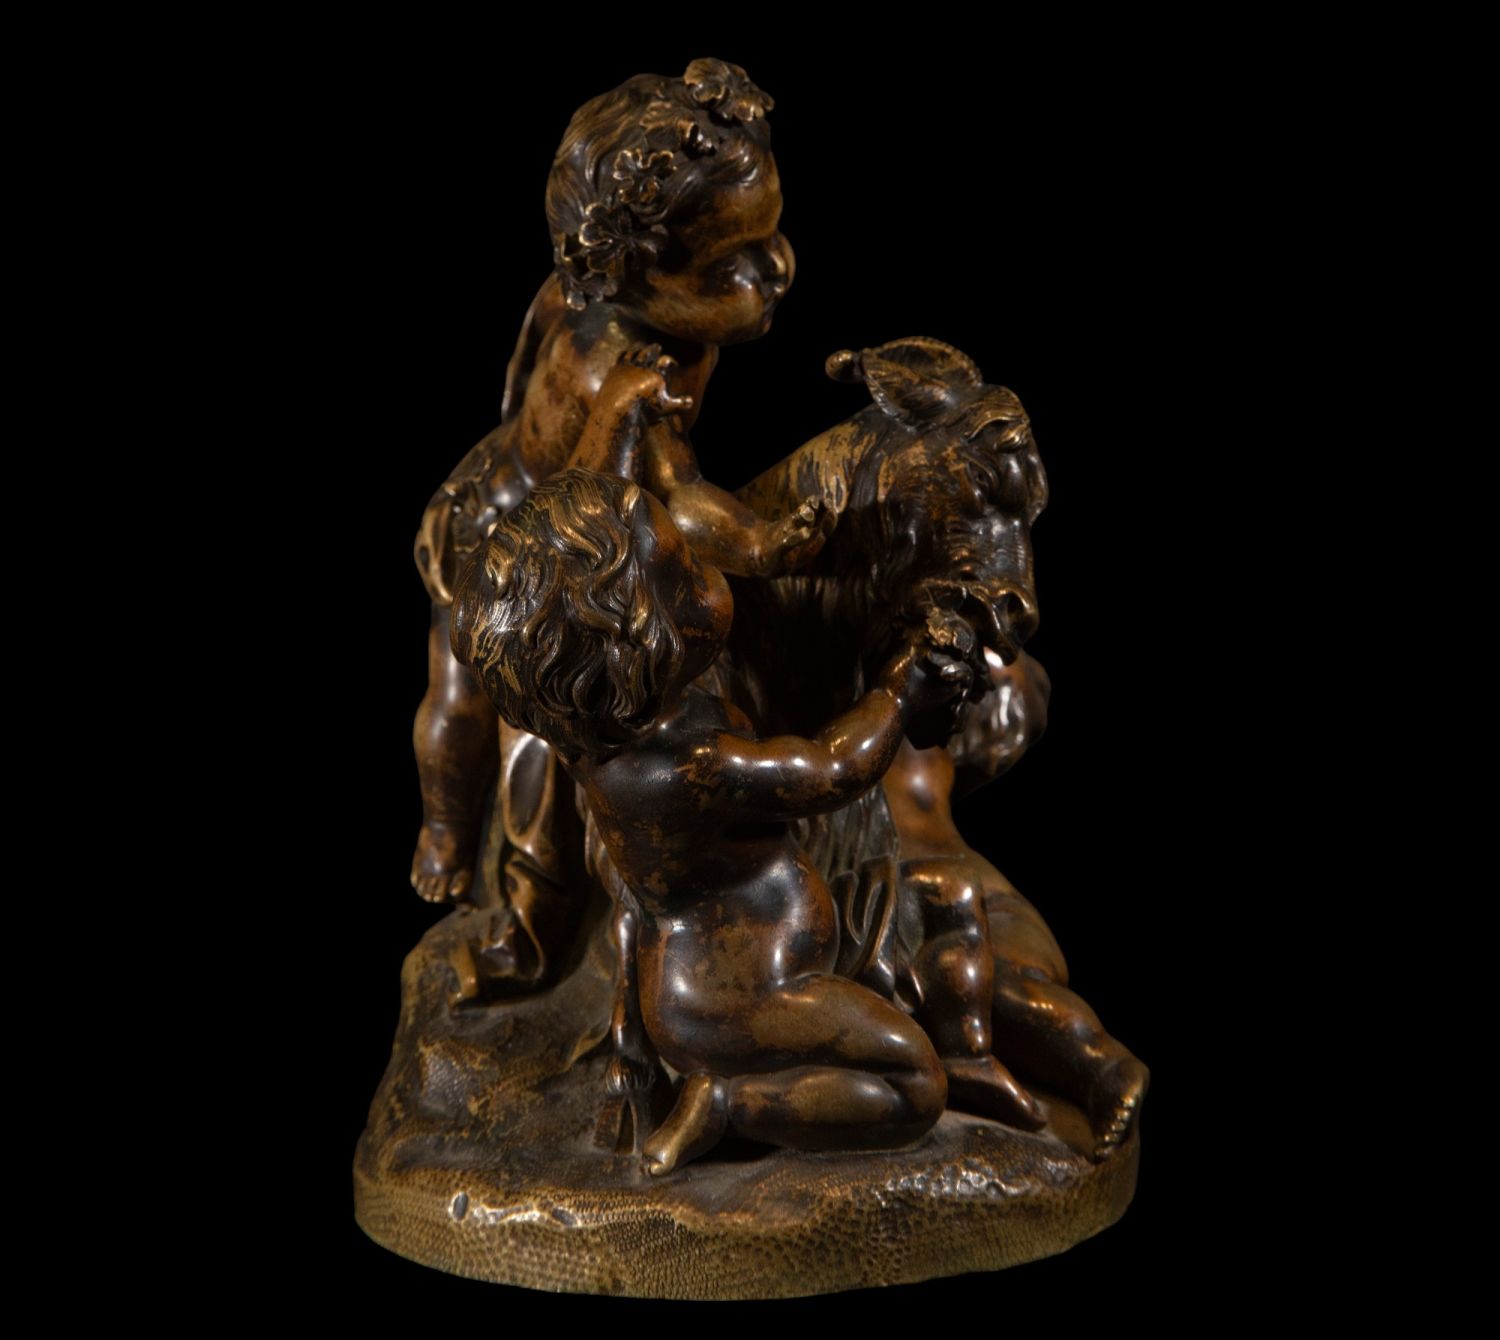 Allegorical bronze sculpture of Amours playing with a goat, 19th century - Image 5 of 6